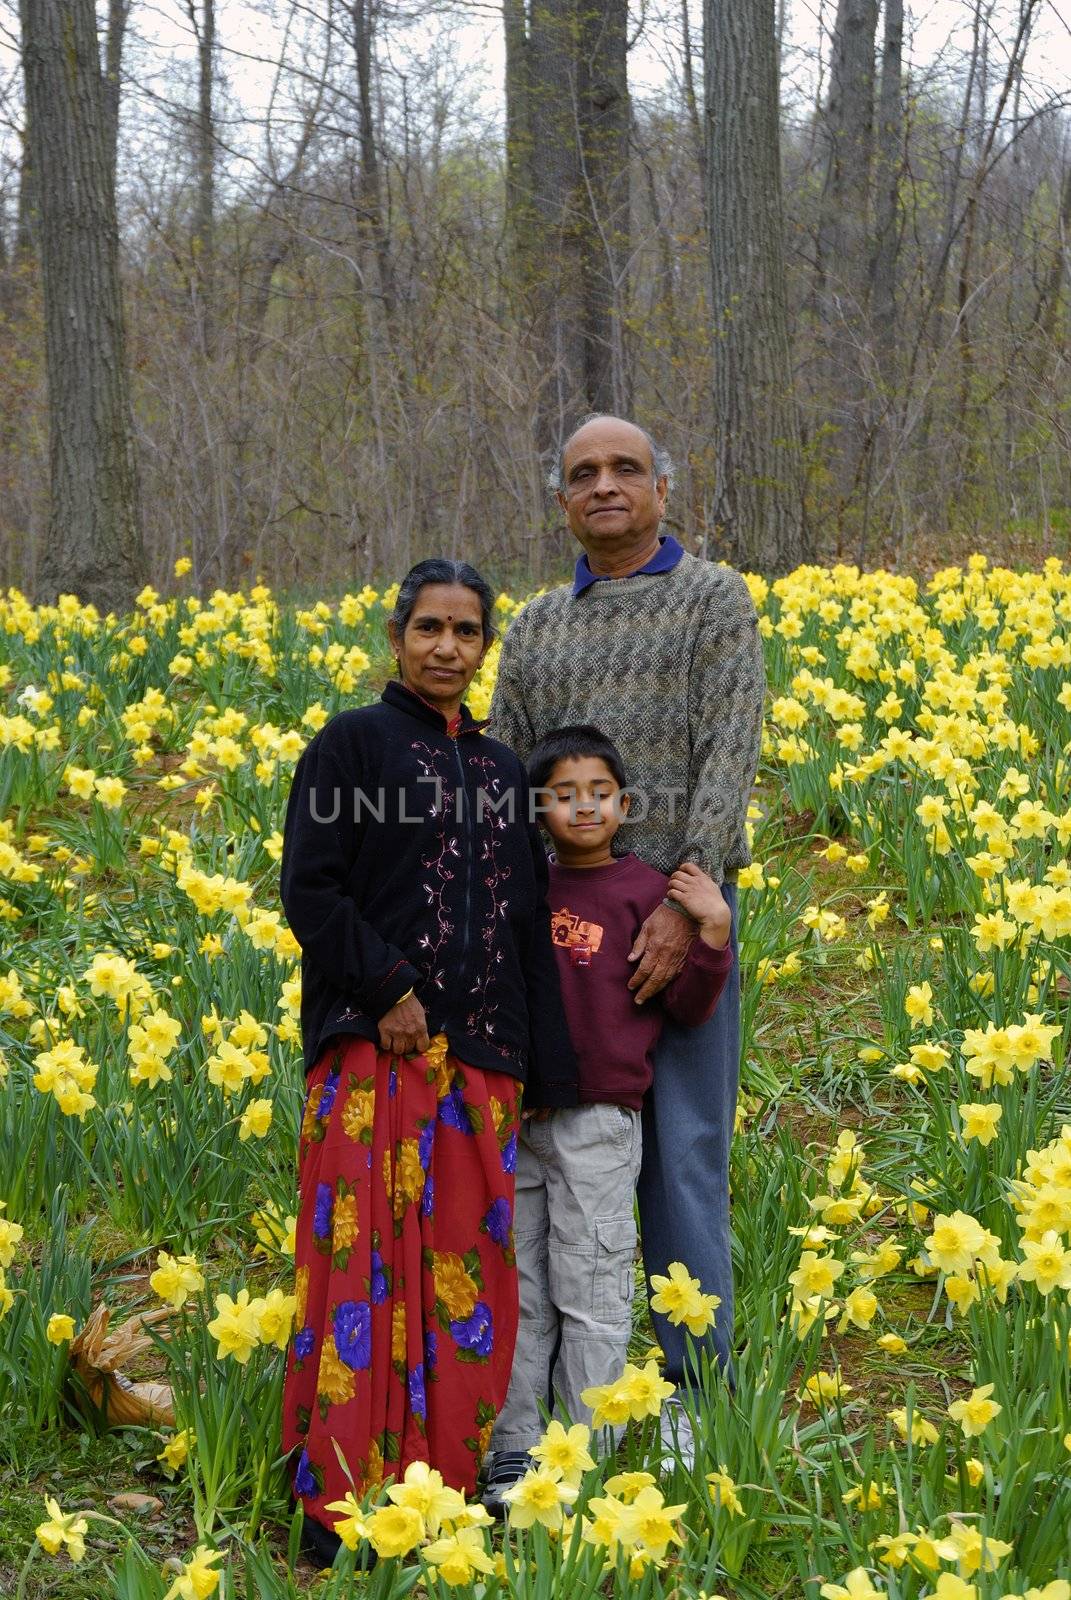 An Indian Kid with grandparents in a field of daffoldils